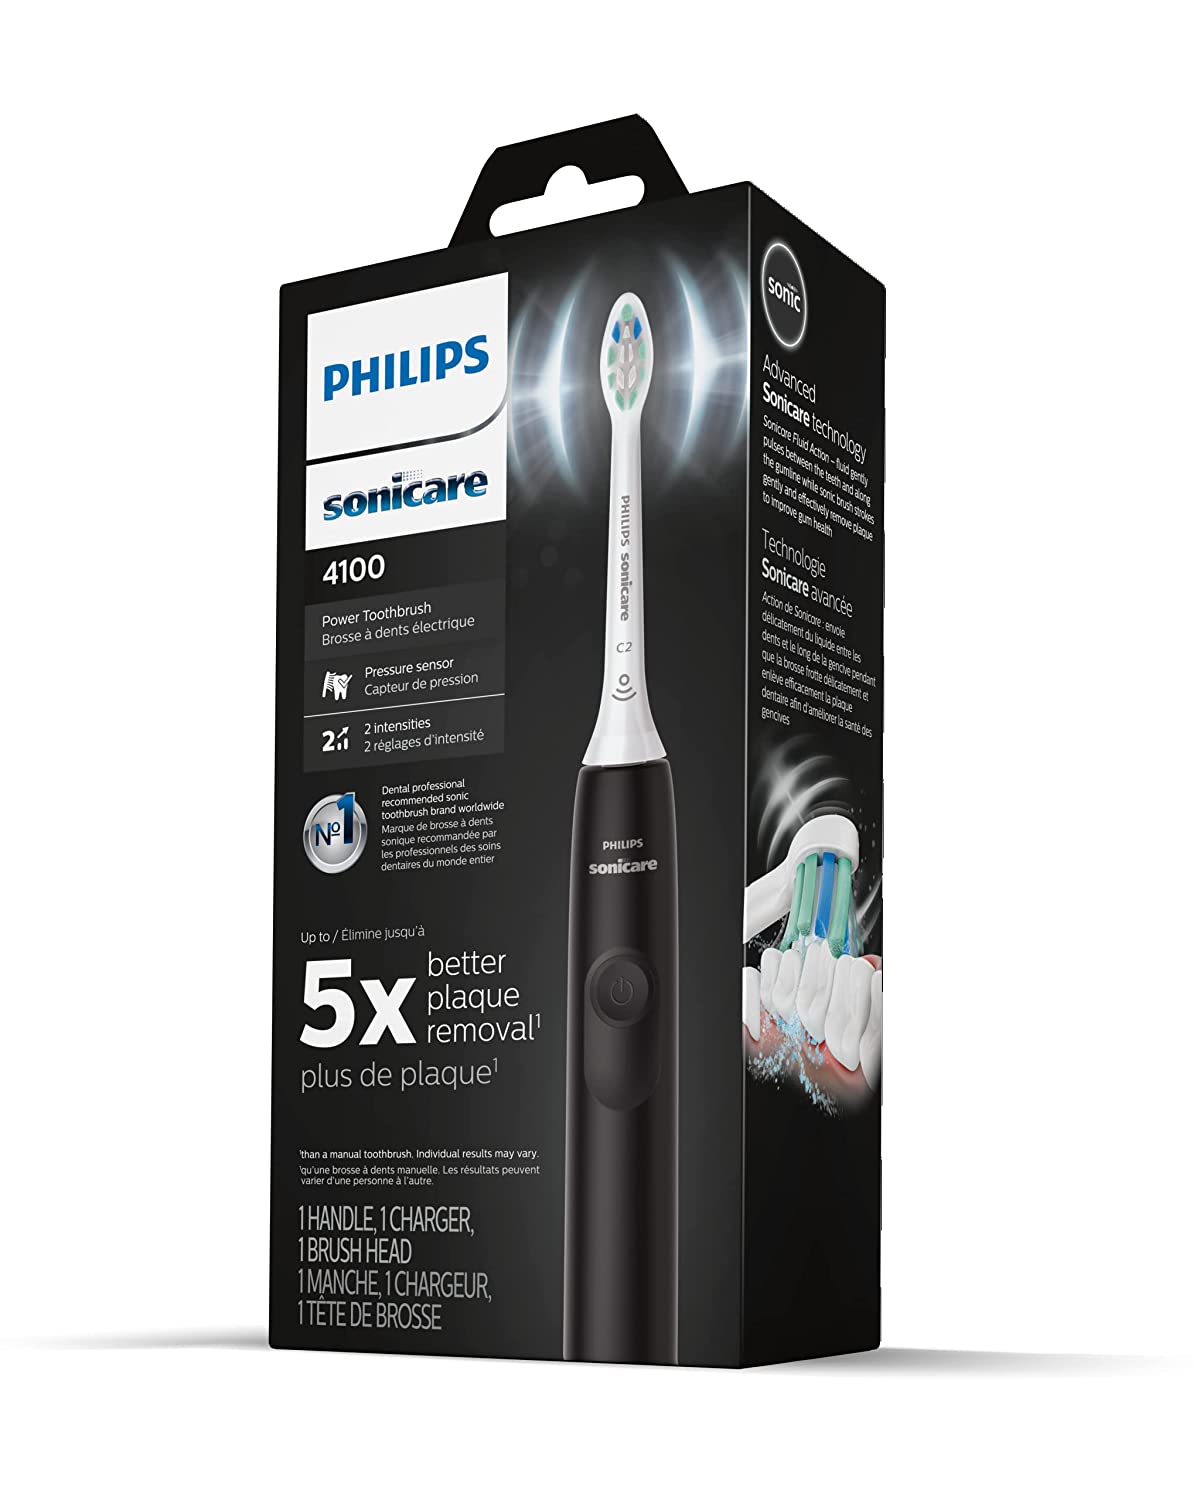 Philips Sonicare ProtectiveClean 4100 แปรงสีฟันไฟฟ้า (รับประกัน 2 ปี)